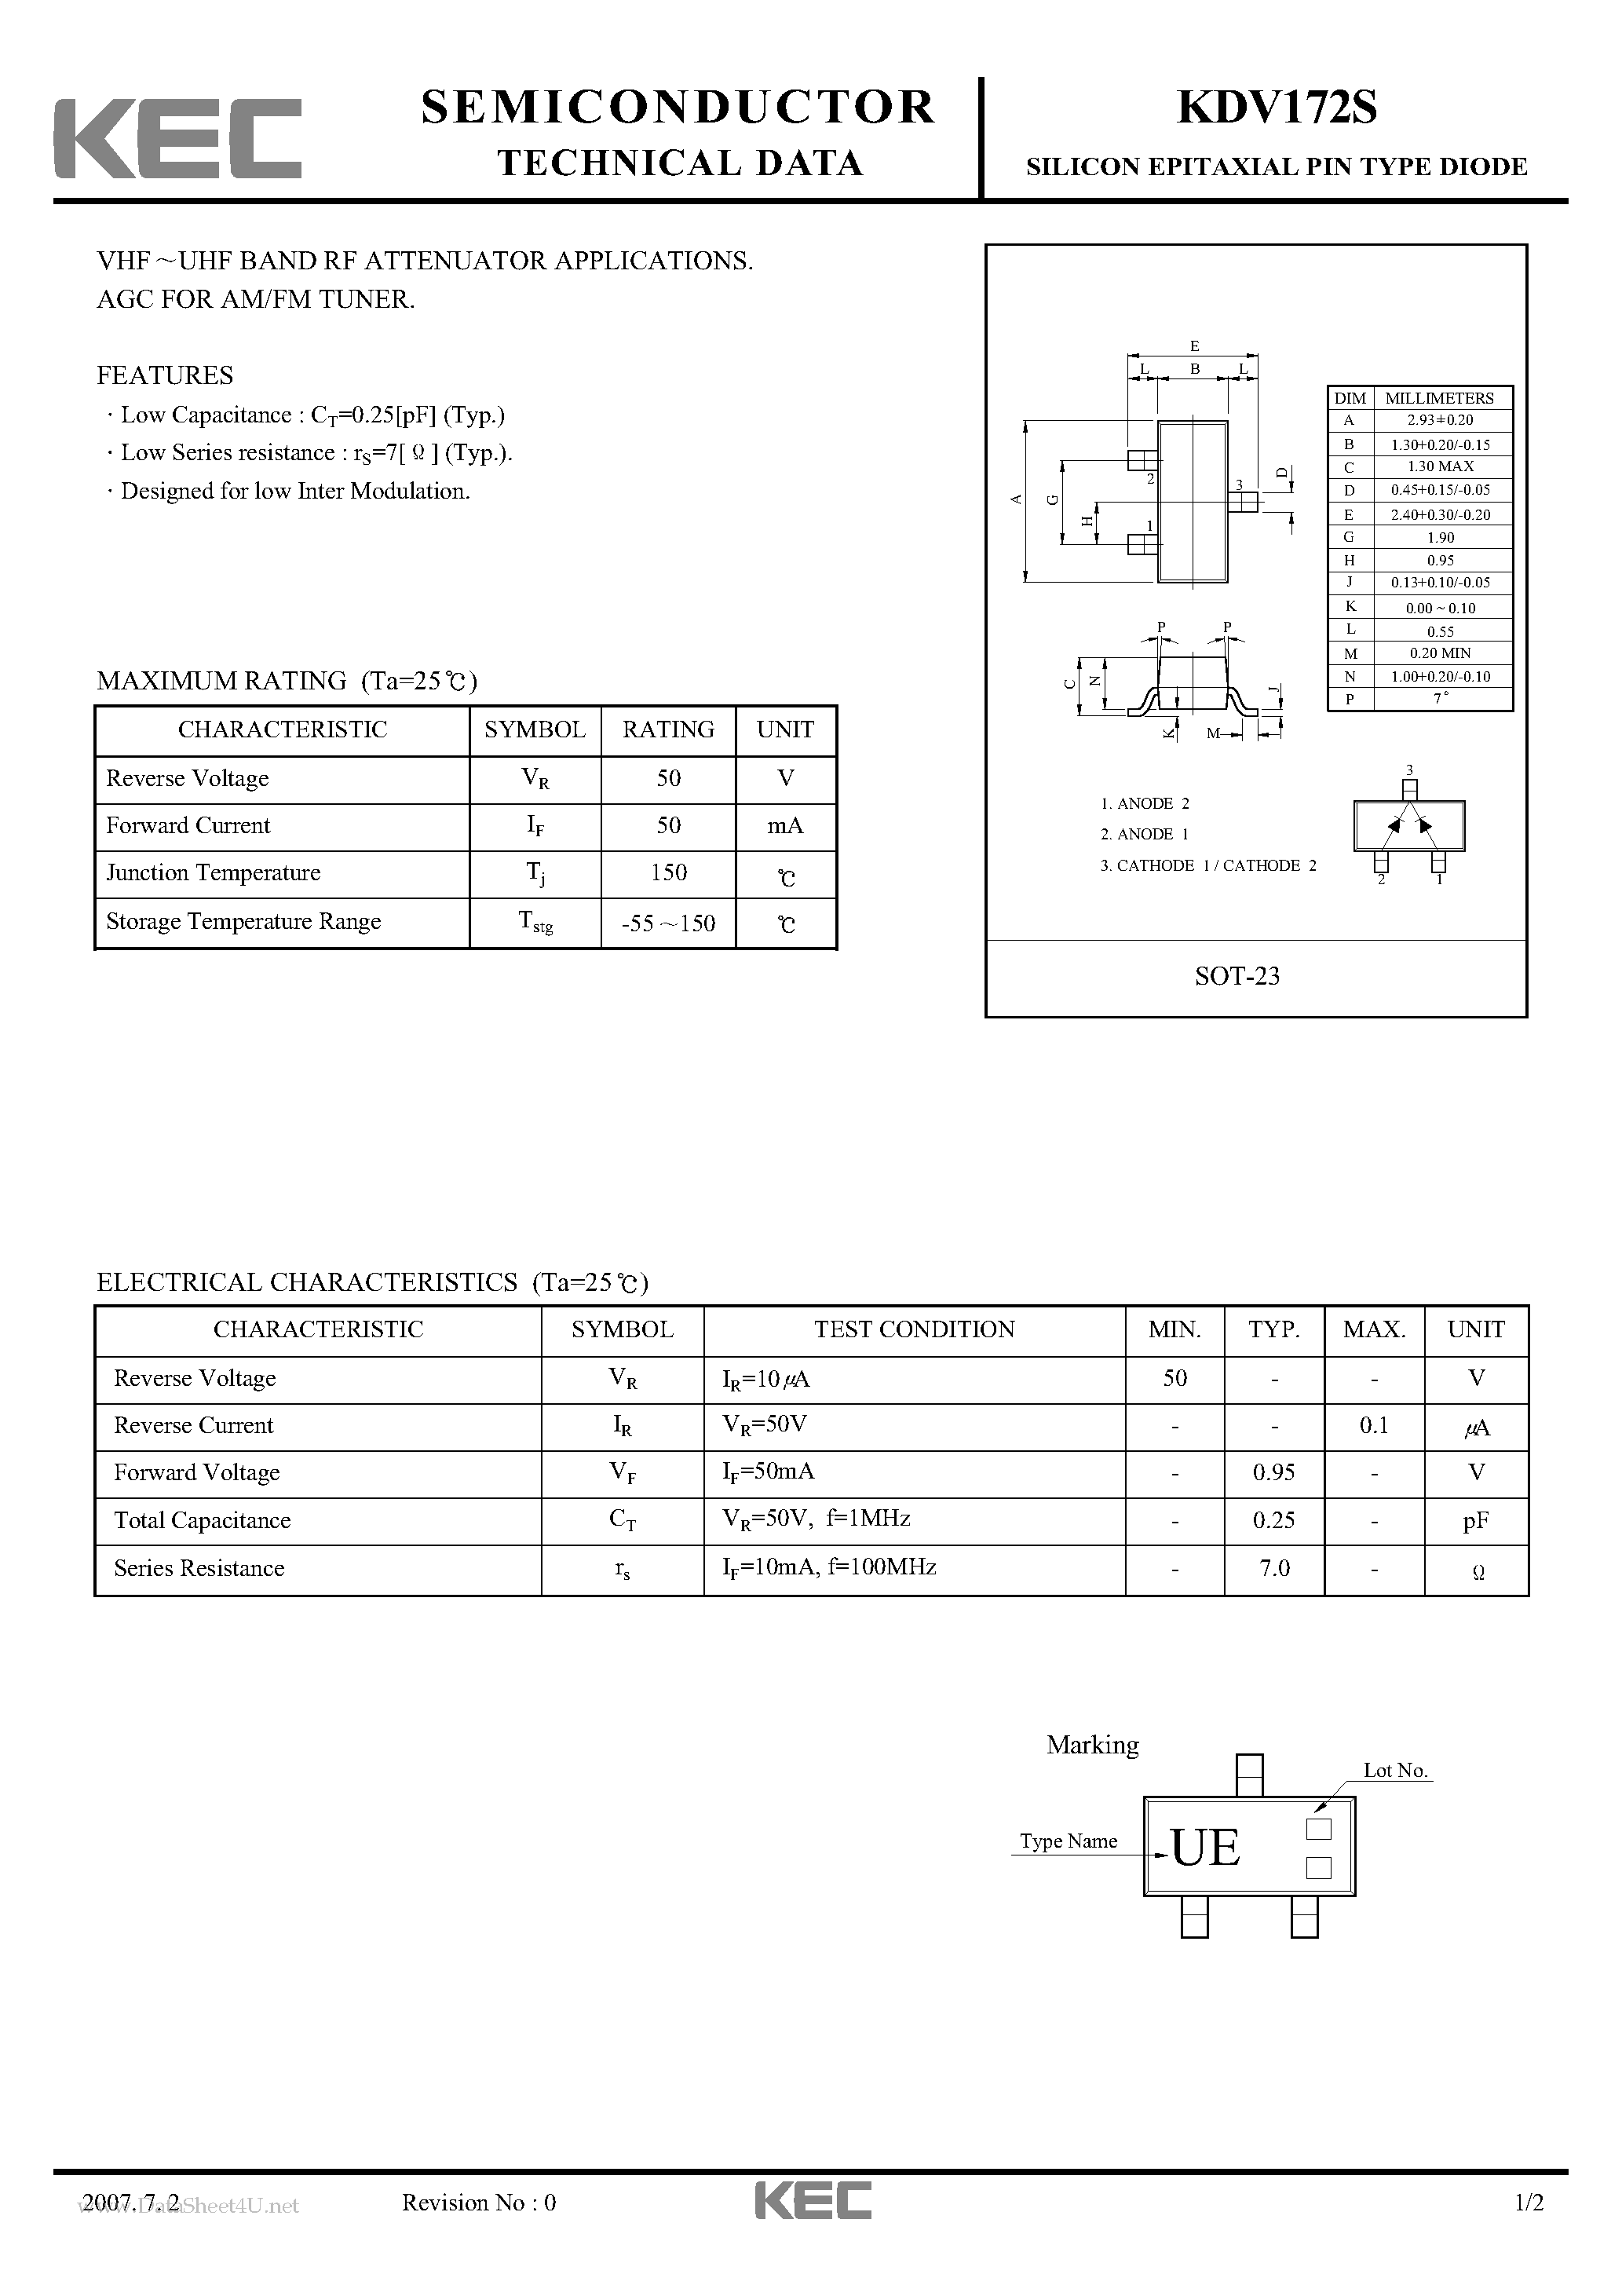 Datasheet KDV172S - SILICON EPITAXIAL PIN TYPE DIODE page 1